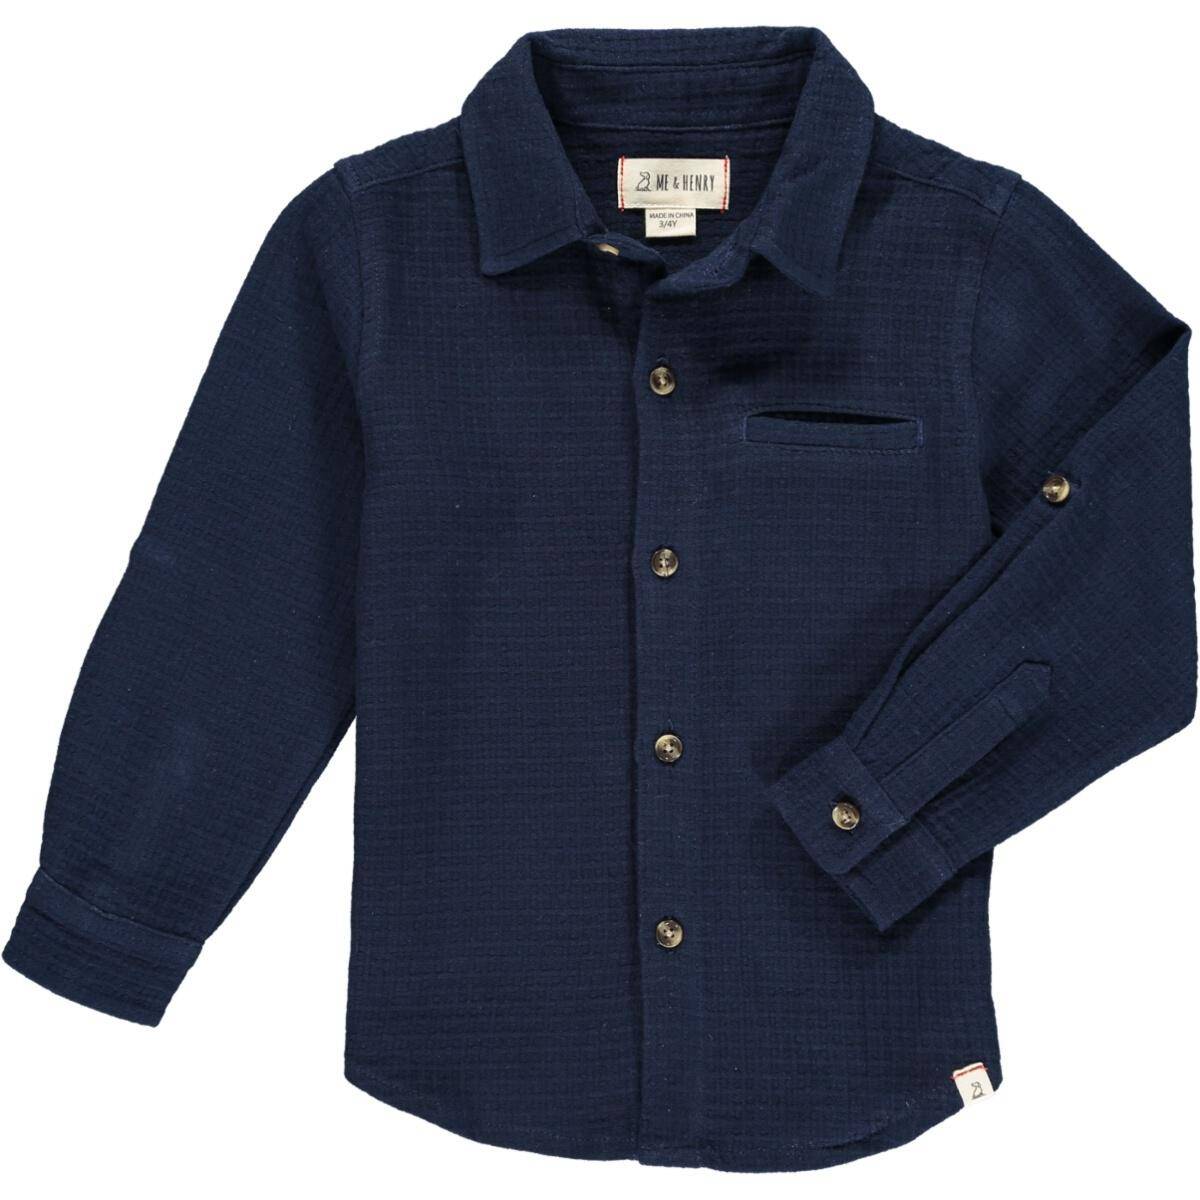 Atwood Shirt - Navy Waffle - Twinkle Twinkle Little One